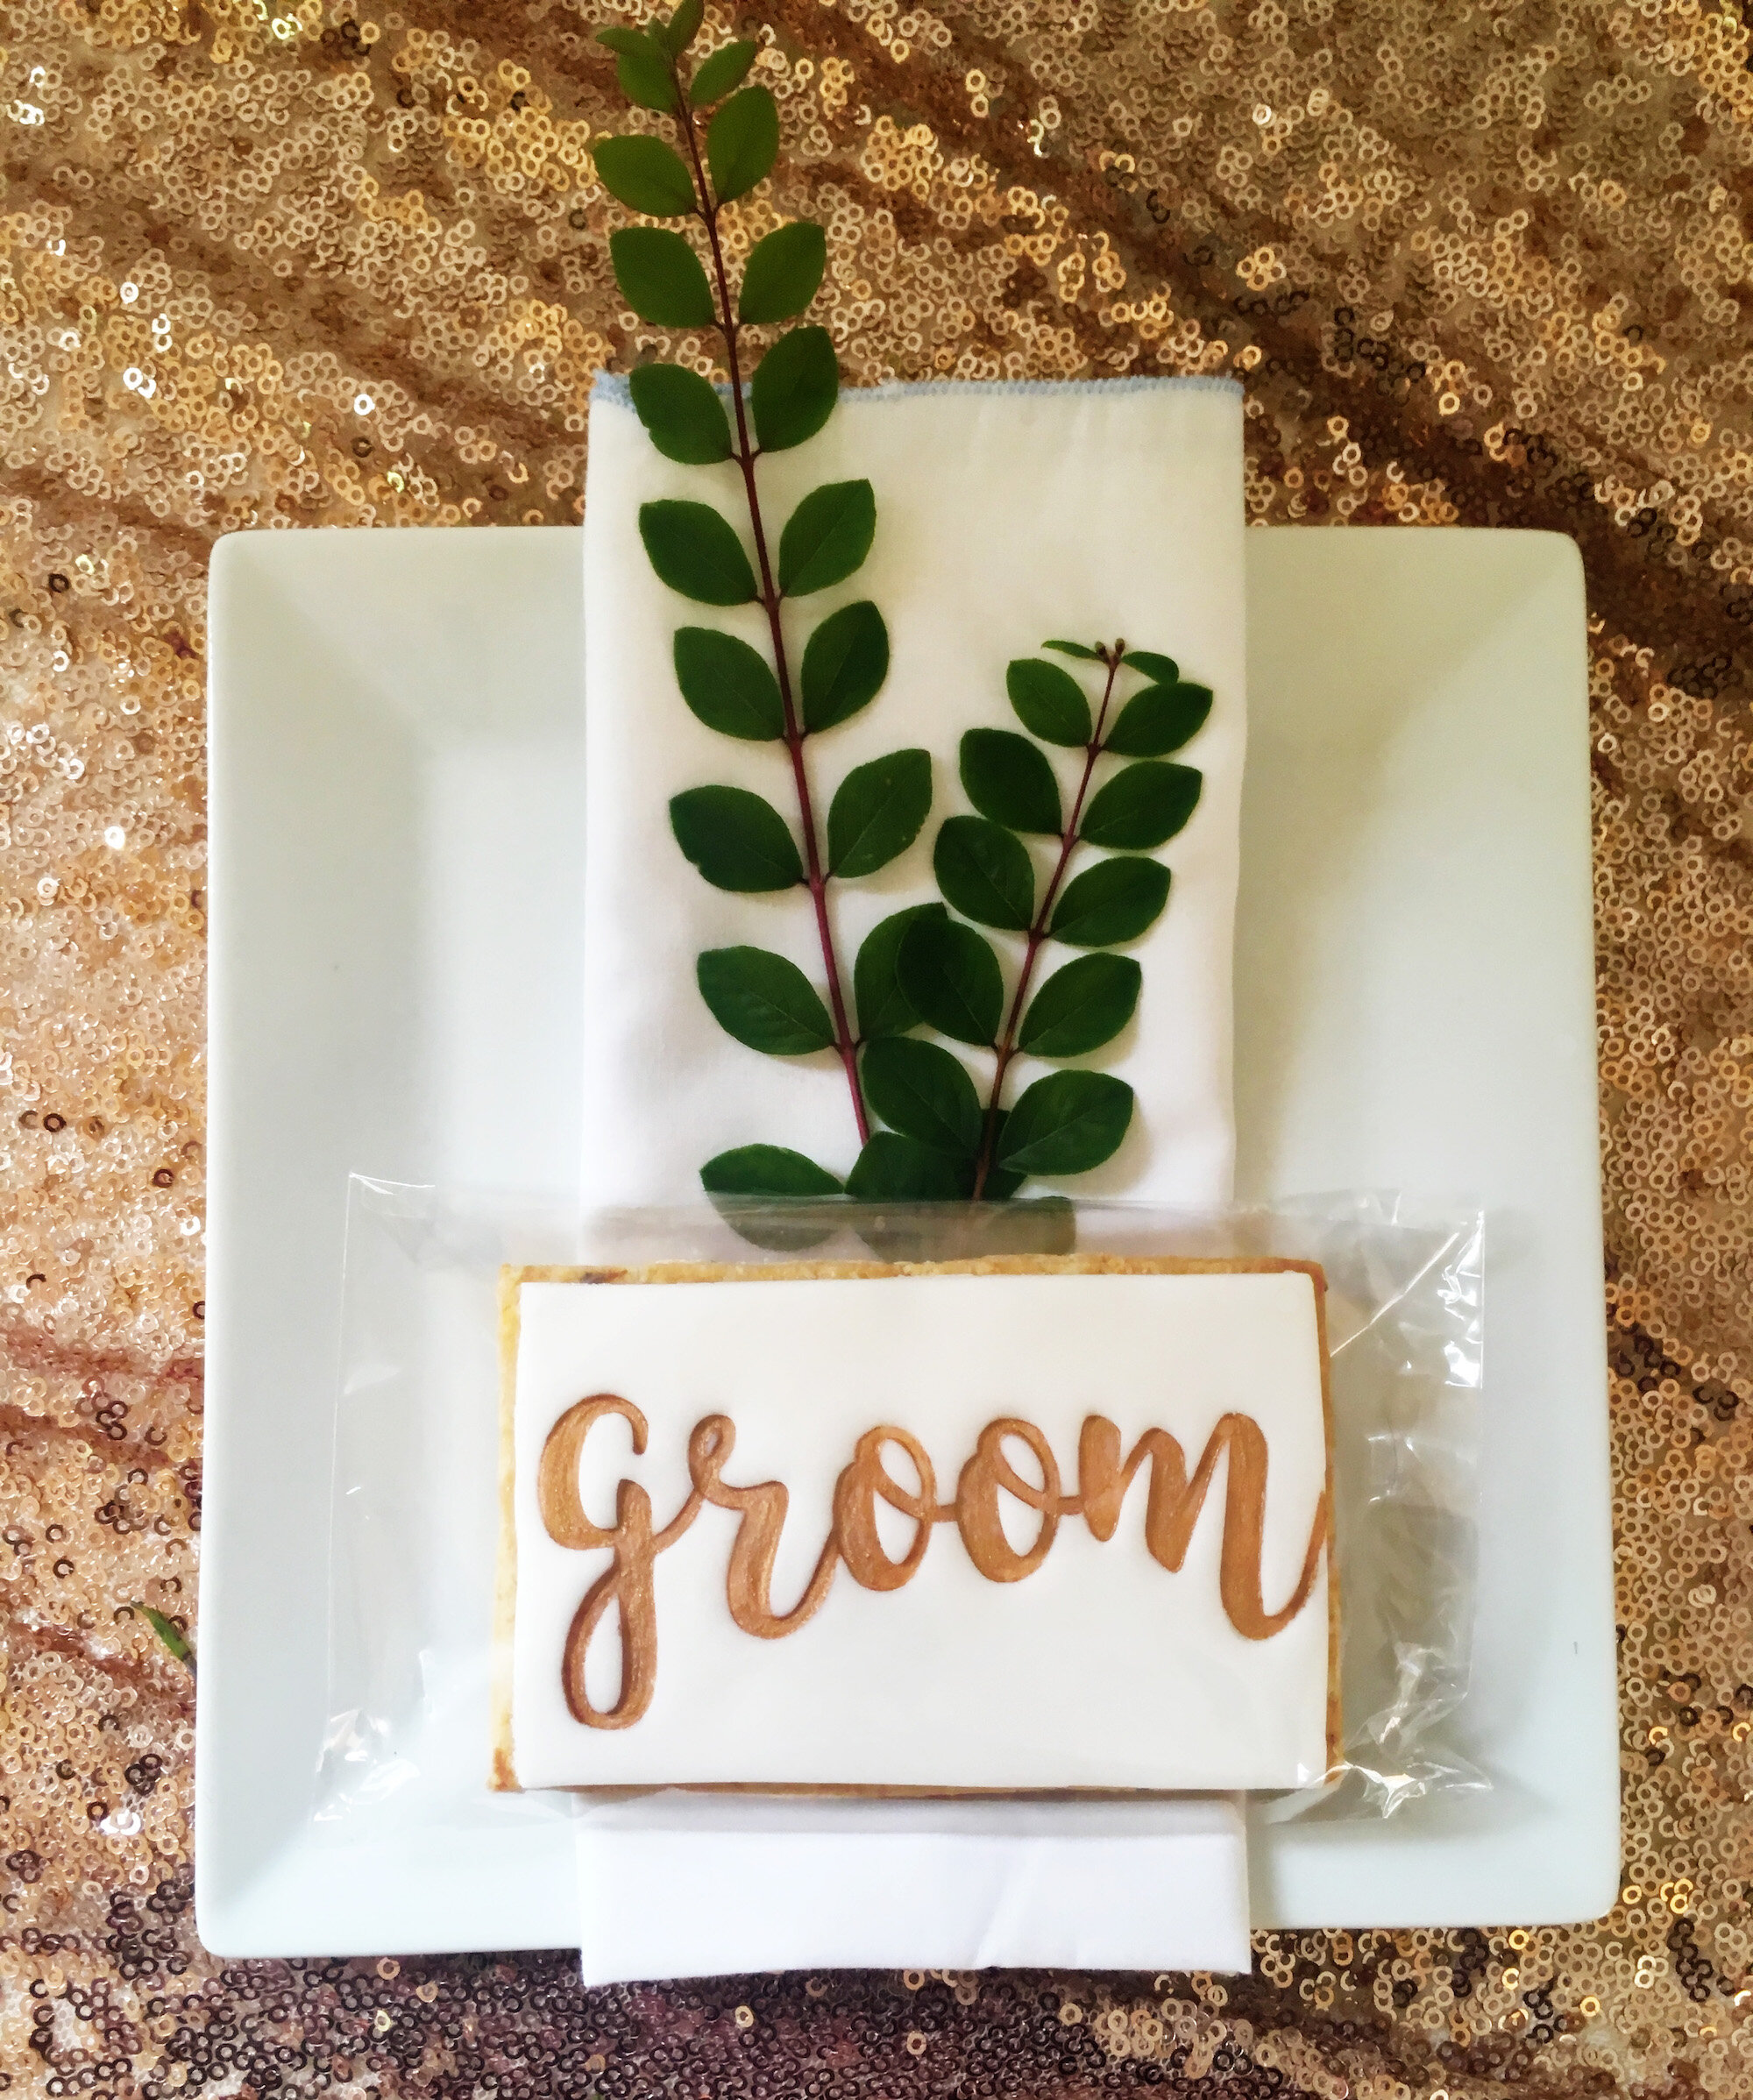 Place-setting-wedding-favours-groom